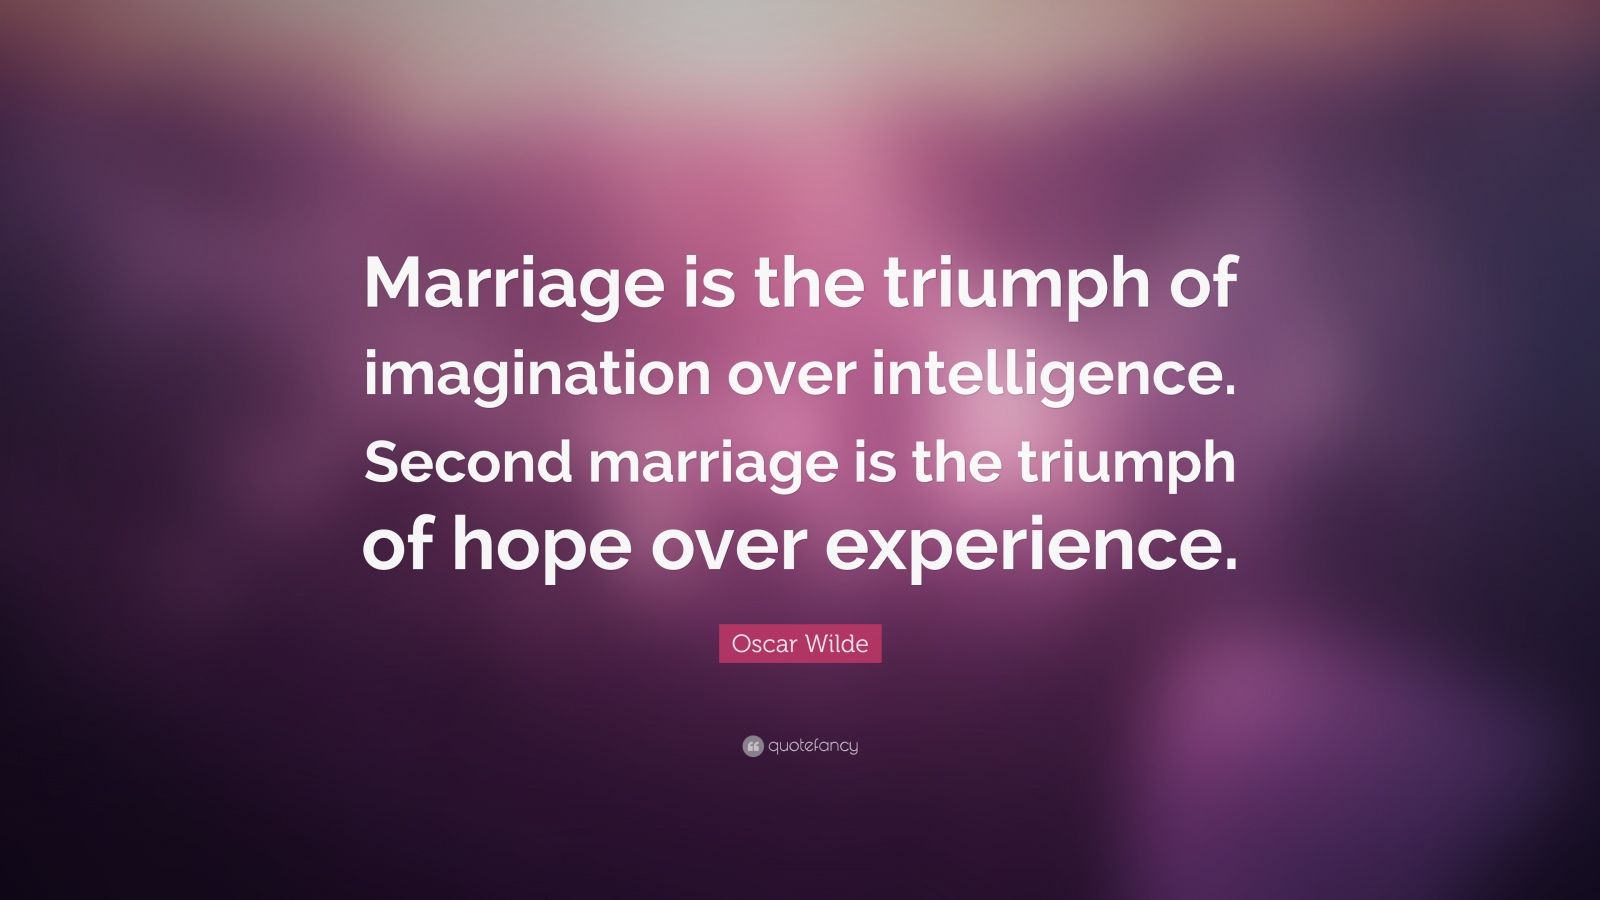 478424 Oscar Wilde Quote Marriage is the triumph of imagination over